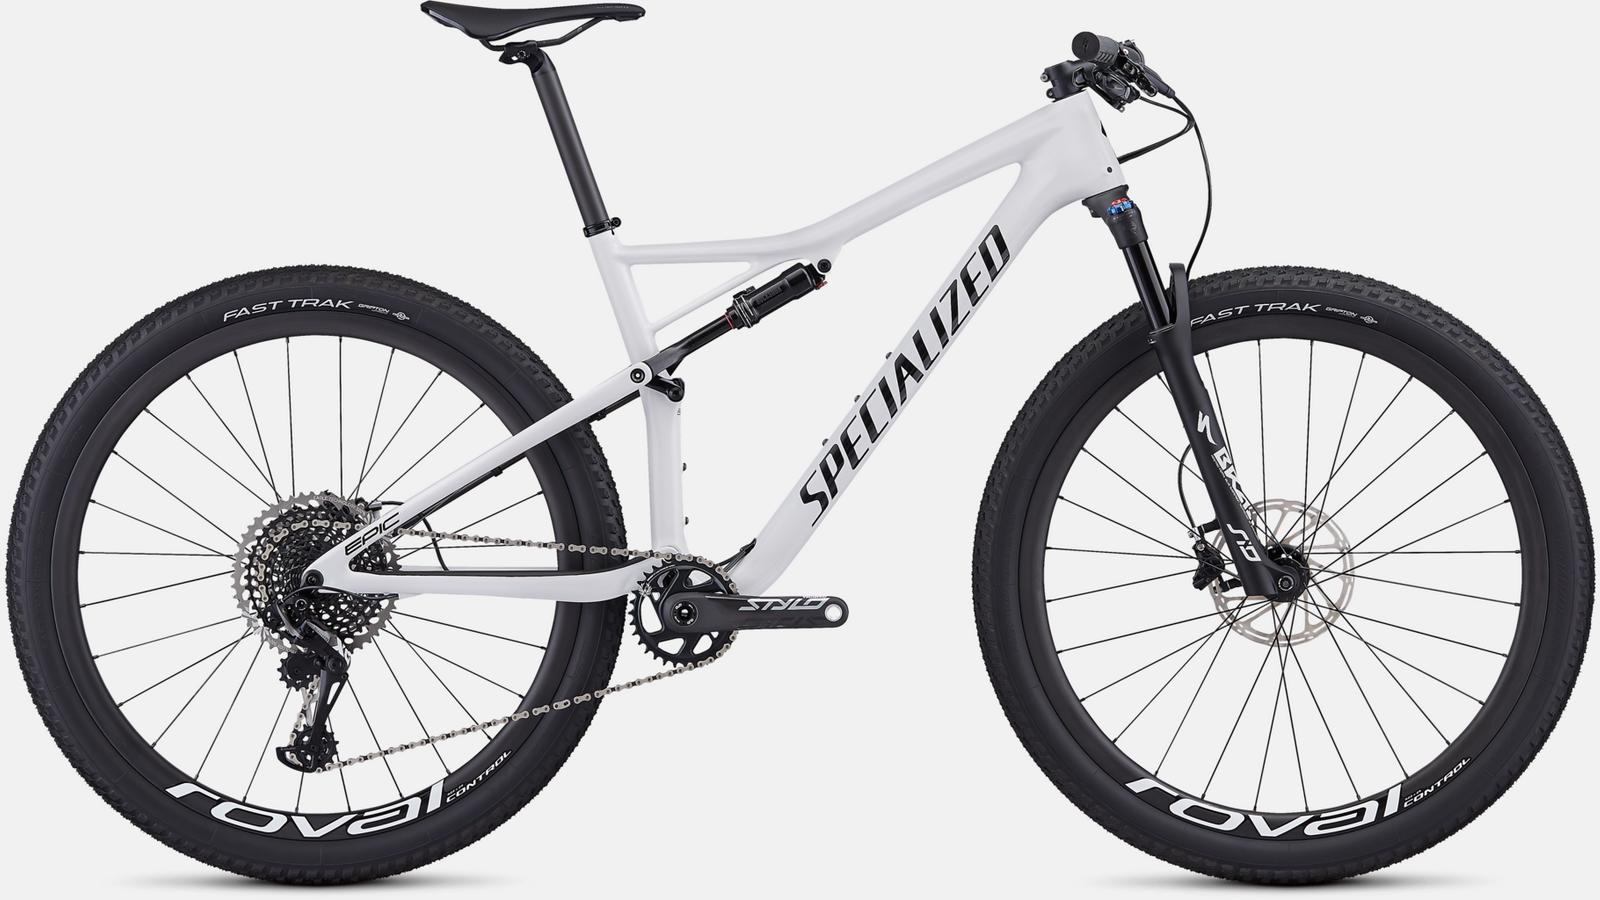 Paint for 2019 Specialized Men's Epic Pro - Gloss White